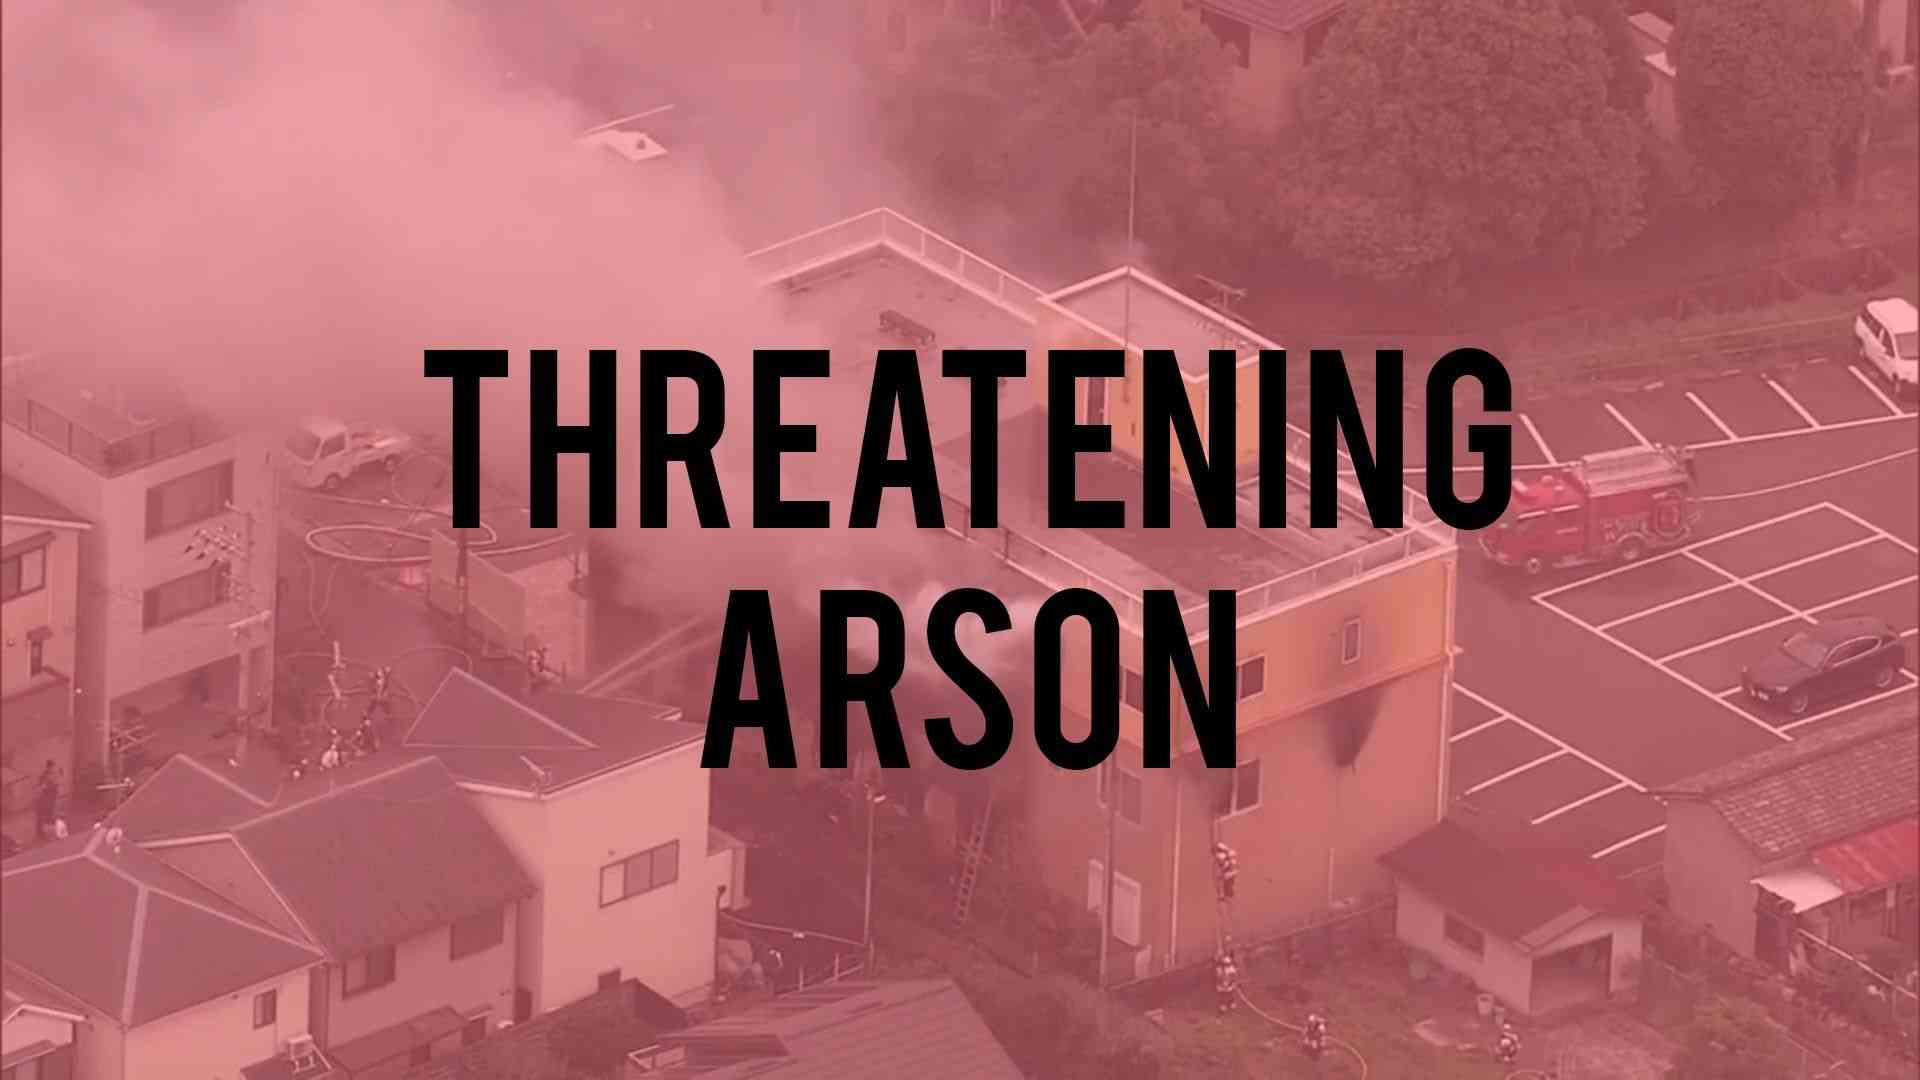 man arrested after threatening with arson 3057 big 1